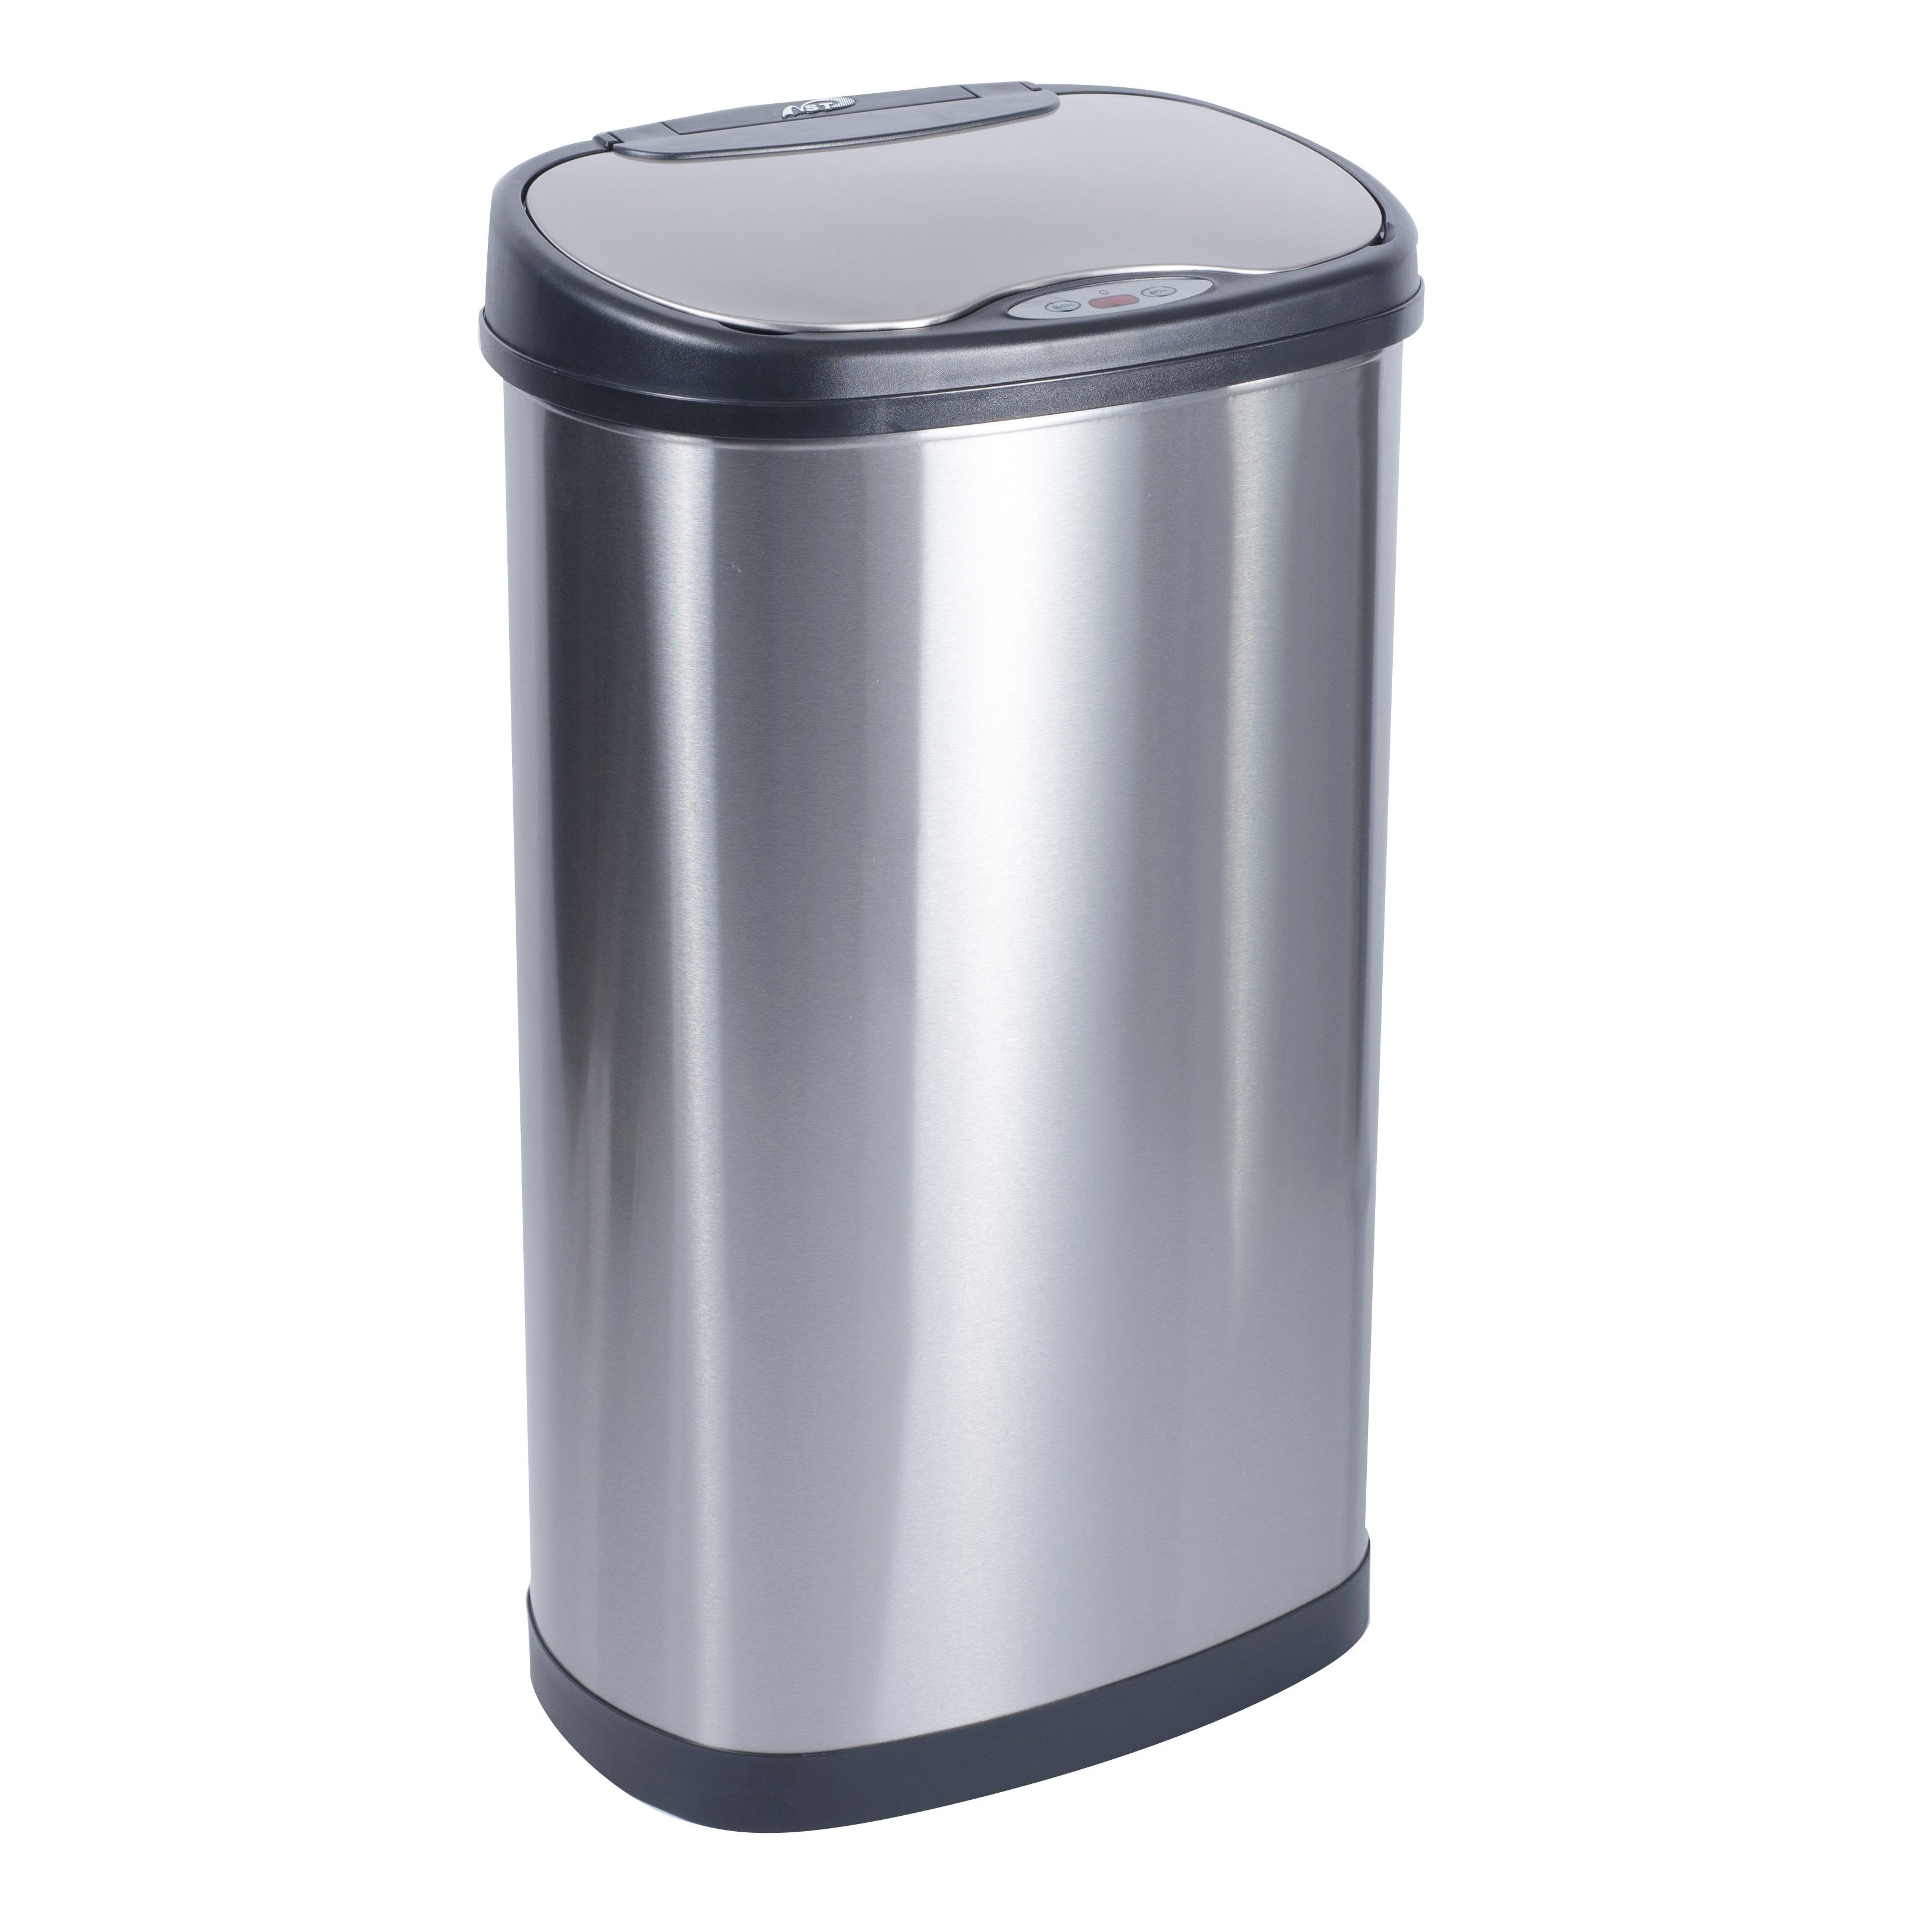 NineStars Automatic Motion Sensor Touchless Stainless Steel Dustbin - 50L